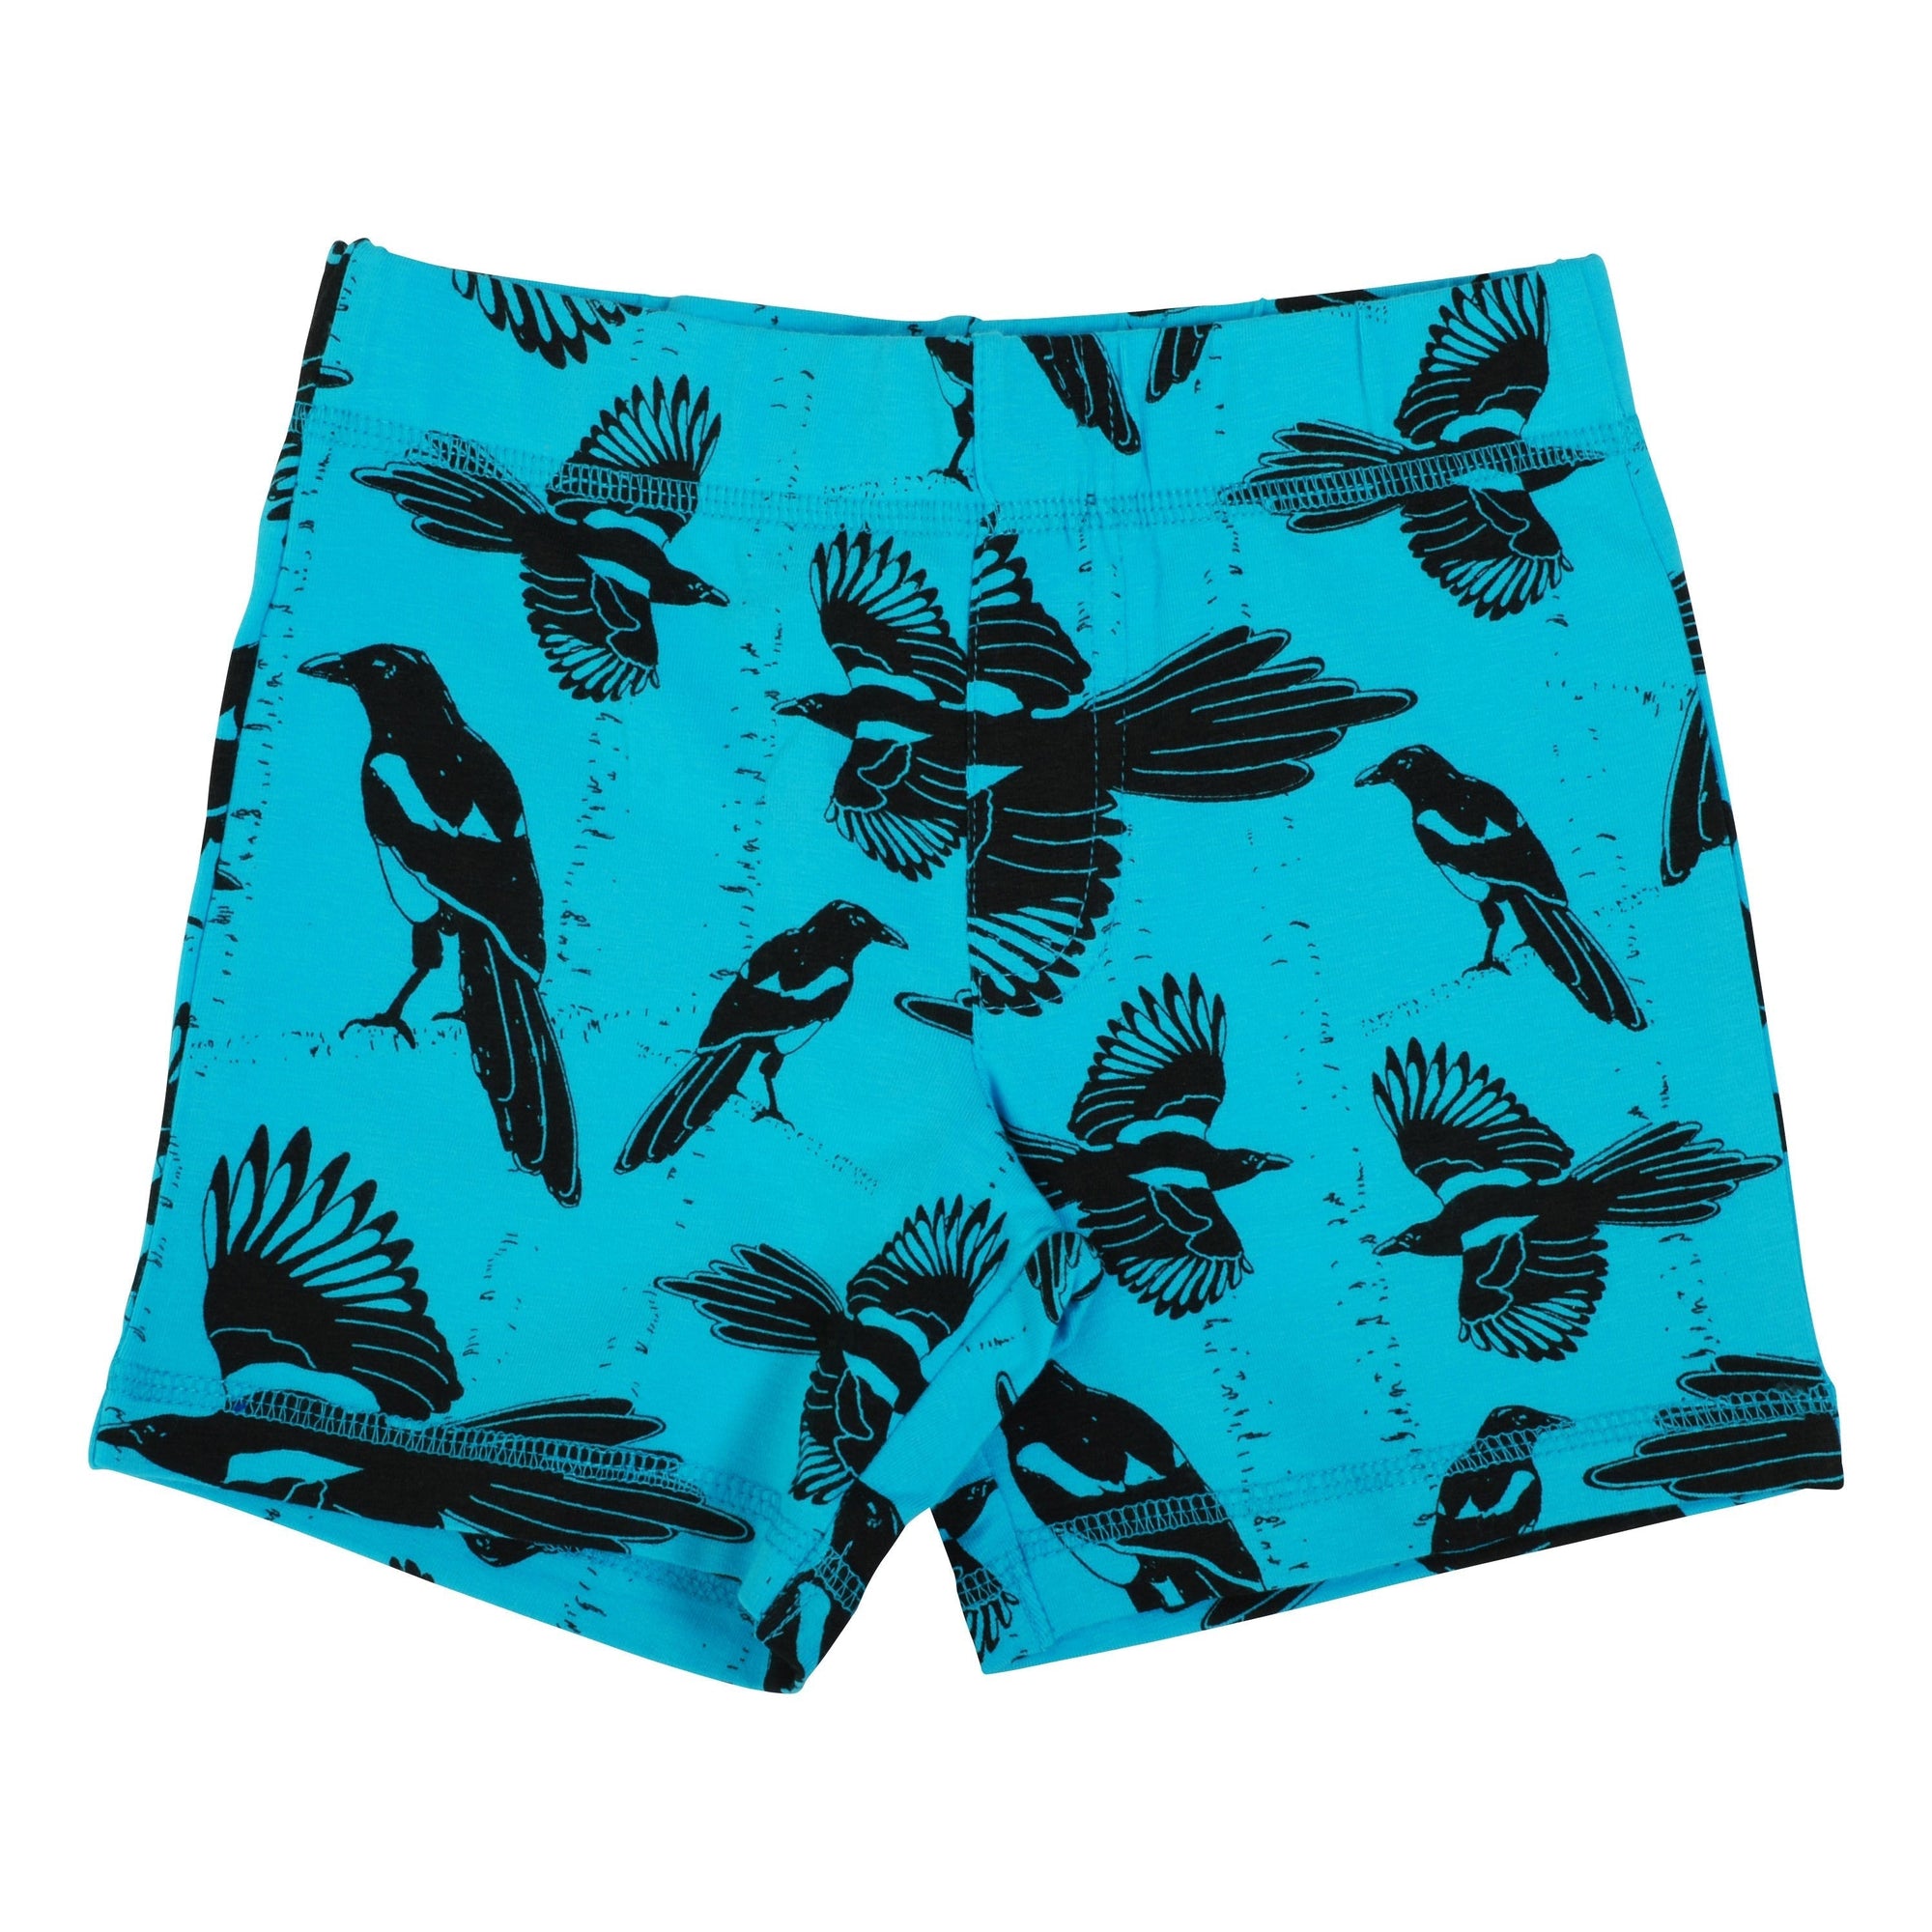 Pica Blue Atoll Shorts - 1 Left Size 6-12 months-More Than A Fling-Modern Rascals